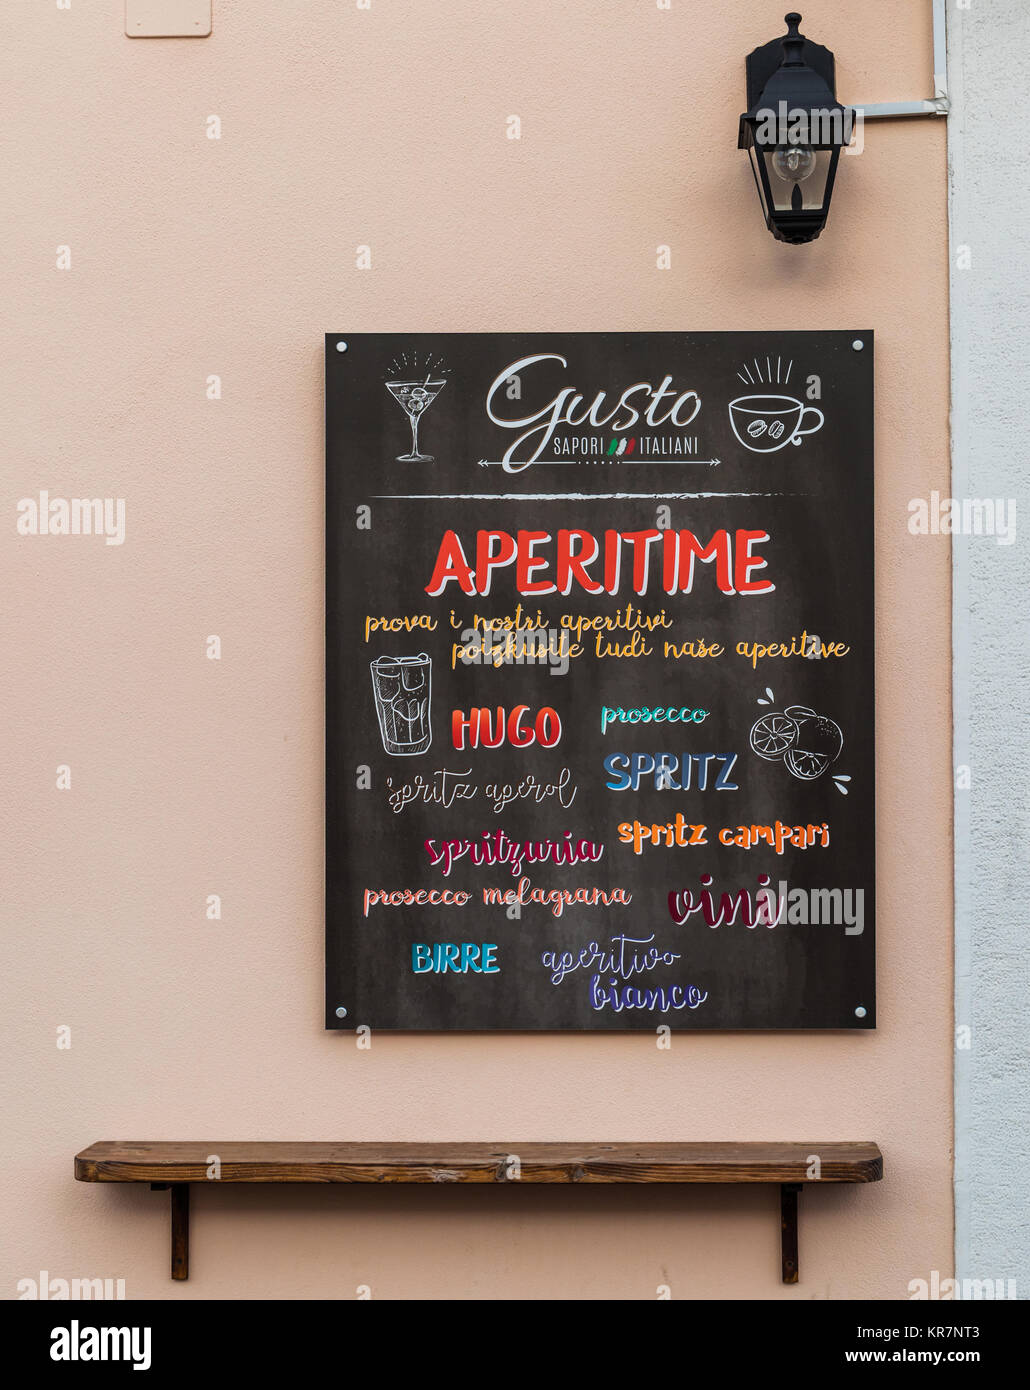 List of different alcoholic drinks on advertising board Stock Photo